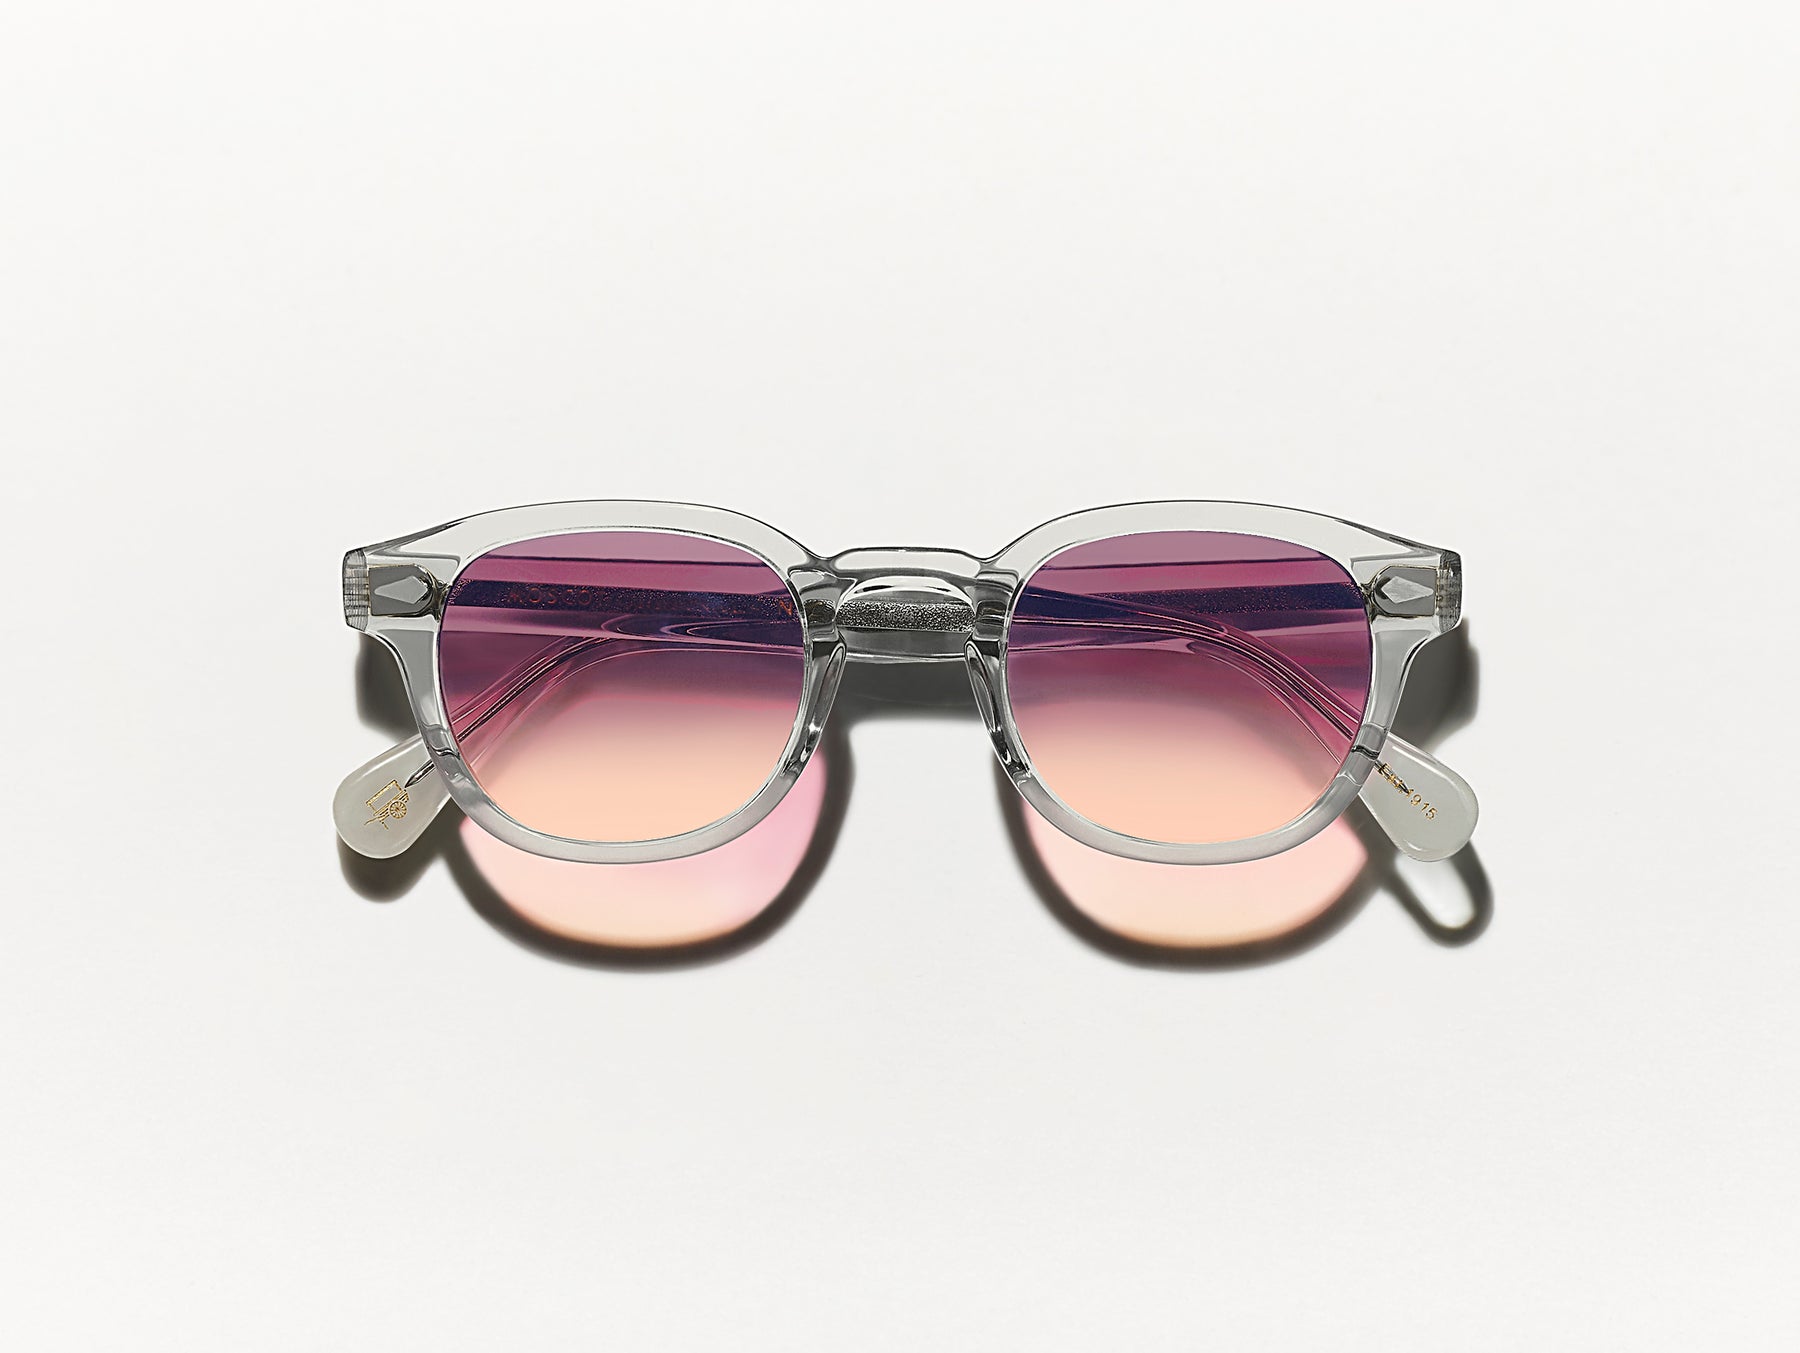 The LEMTOSH Light Grey with City Lights Tinted Lenses